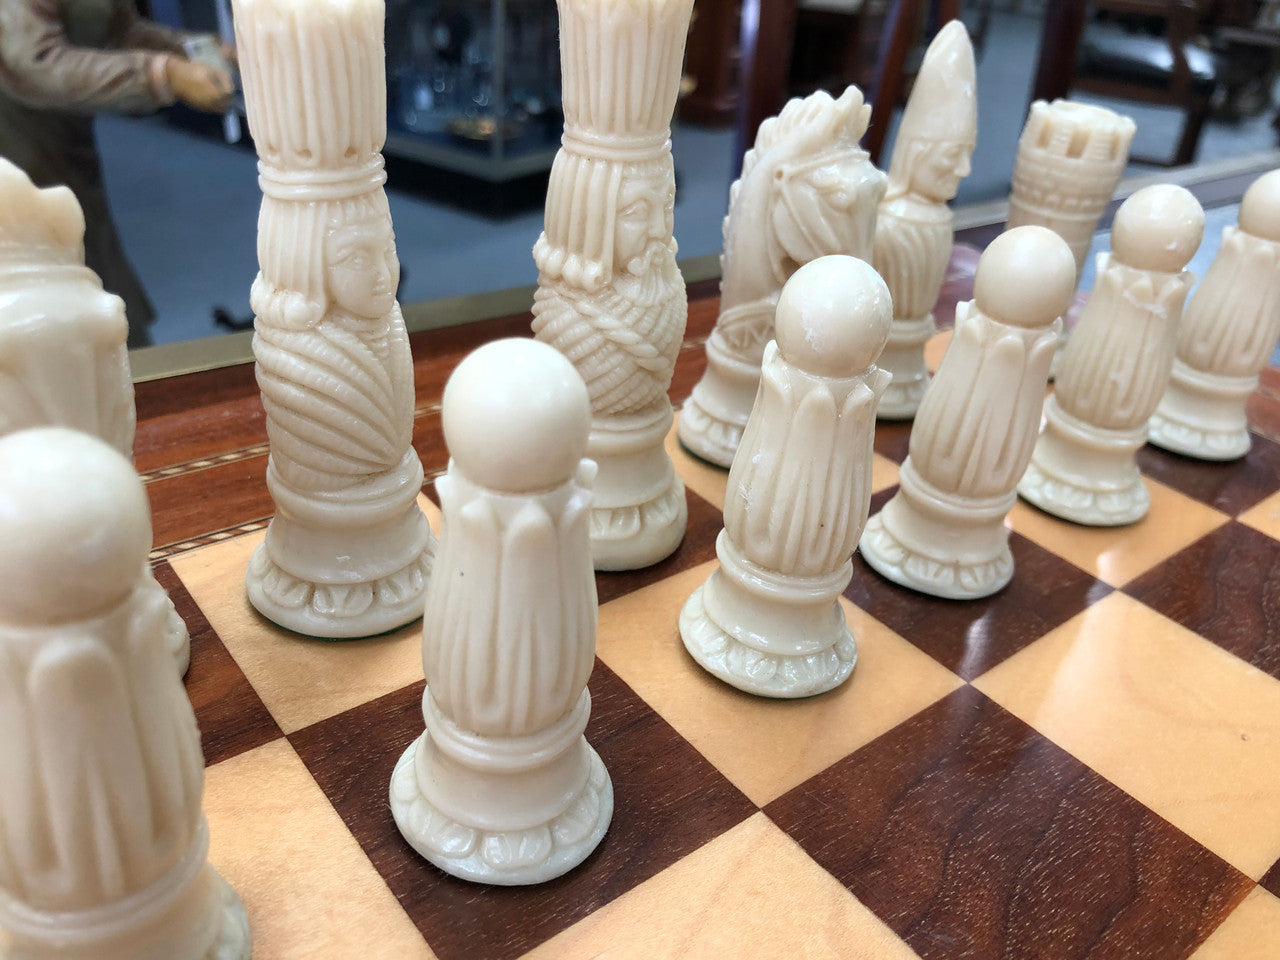 Lovely vintage chess set of handcrafted Takaka chess pieces from Crisan Craft in good condition, made in New Zealand.